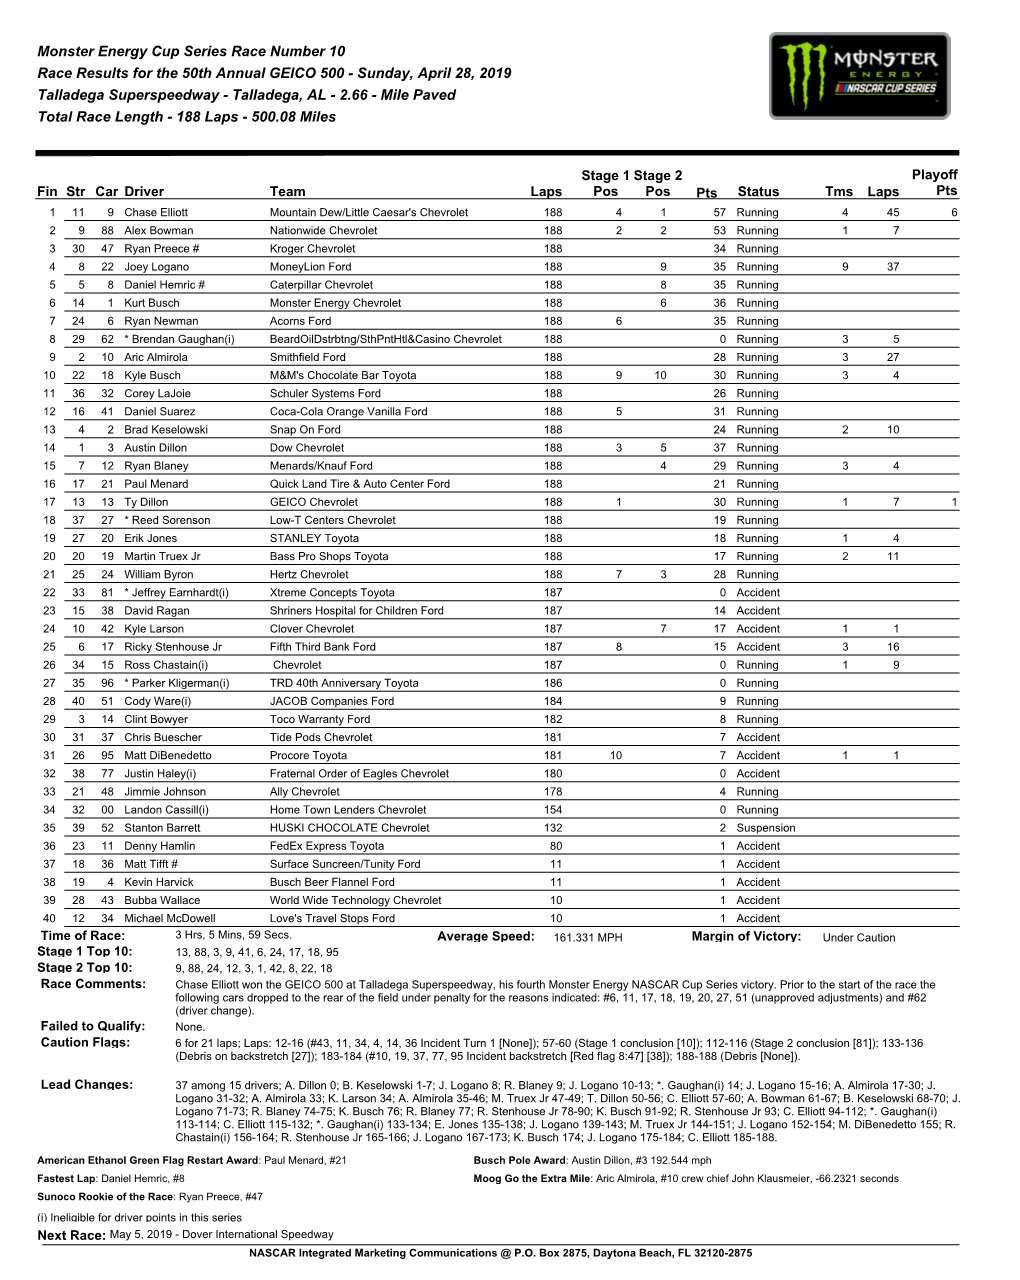 Monster Energy Cup Series Race Number 10 Race Results for The